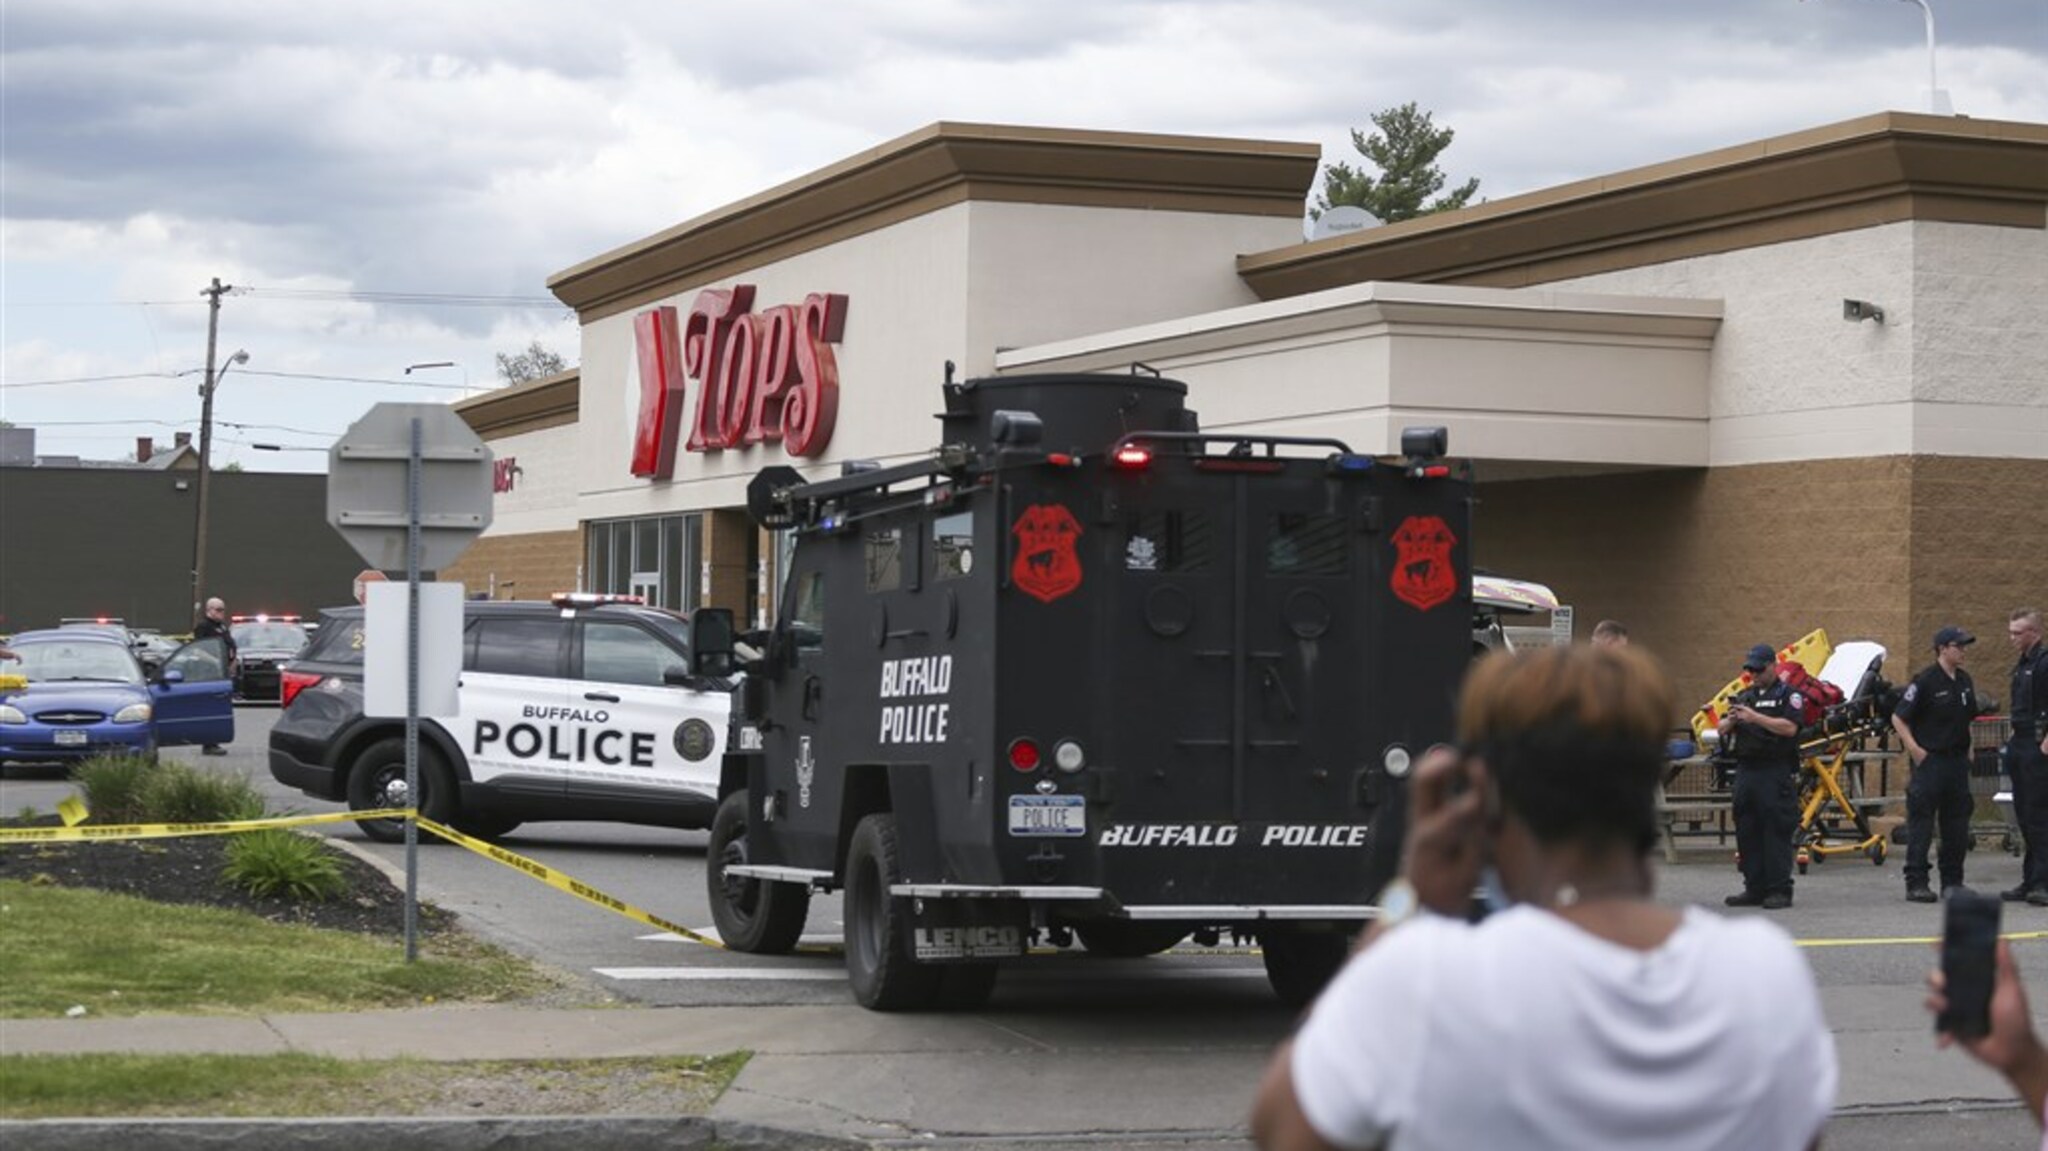 At least 10 people have been killed in a shooting at an American supermarket suspected of being racist